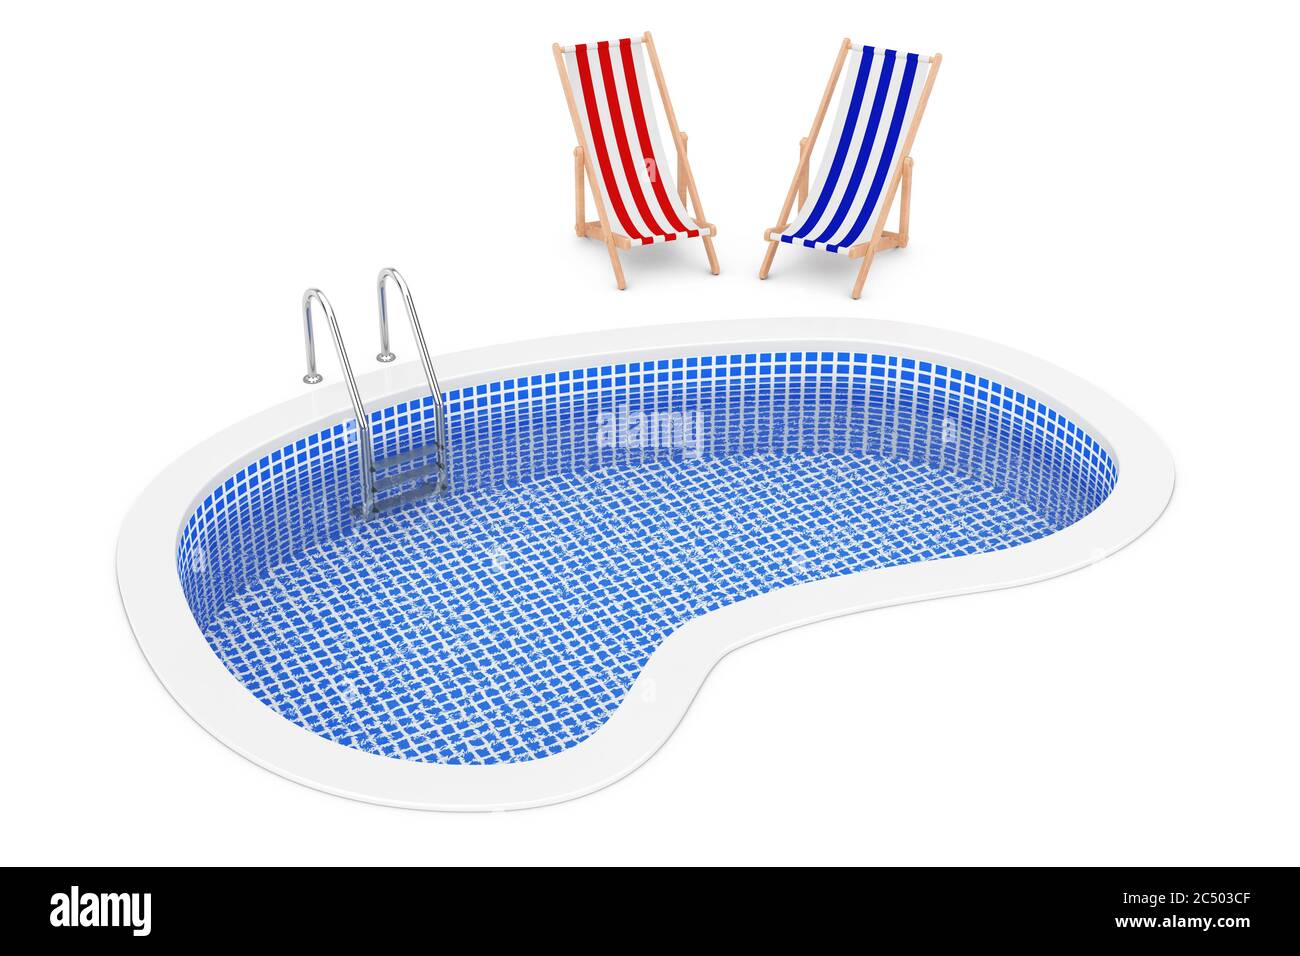 Blue Outdoor Swimming Water Pool with Ladder and Beach Chairs on a white background. 3d Rendering. Stock Photo